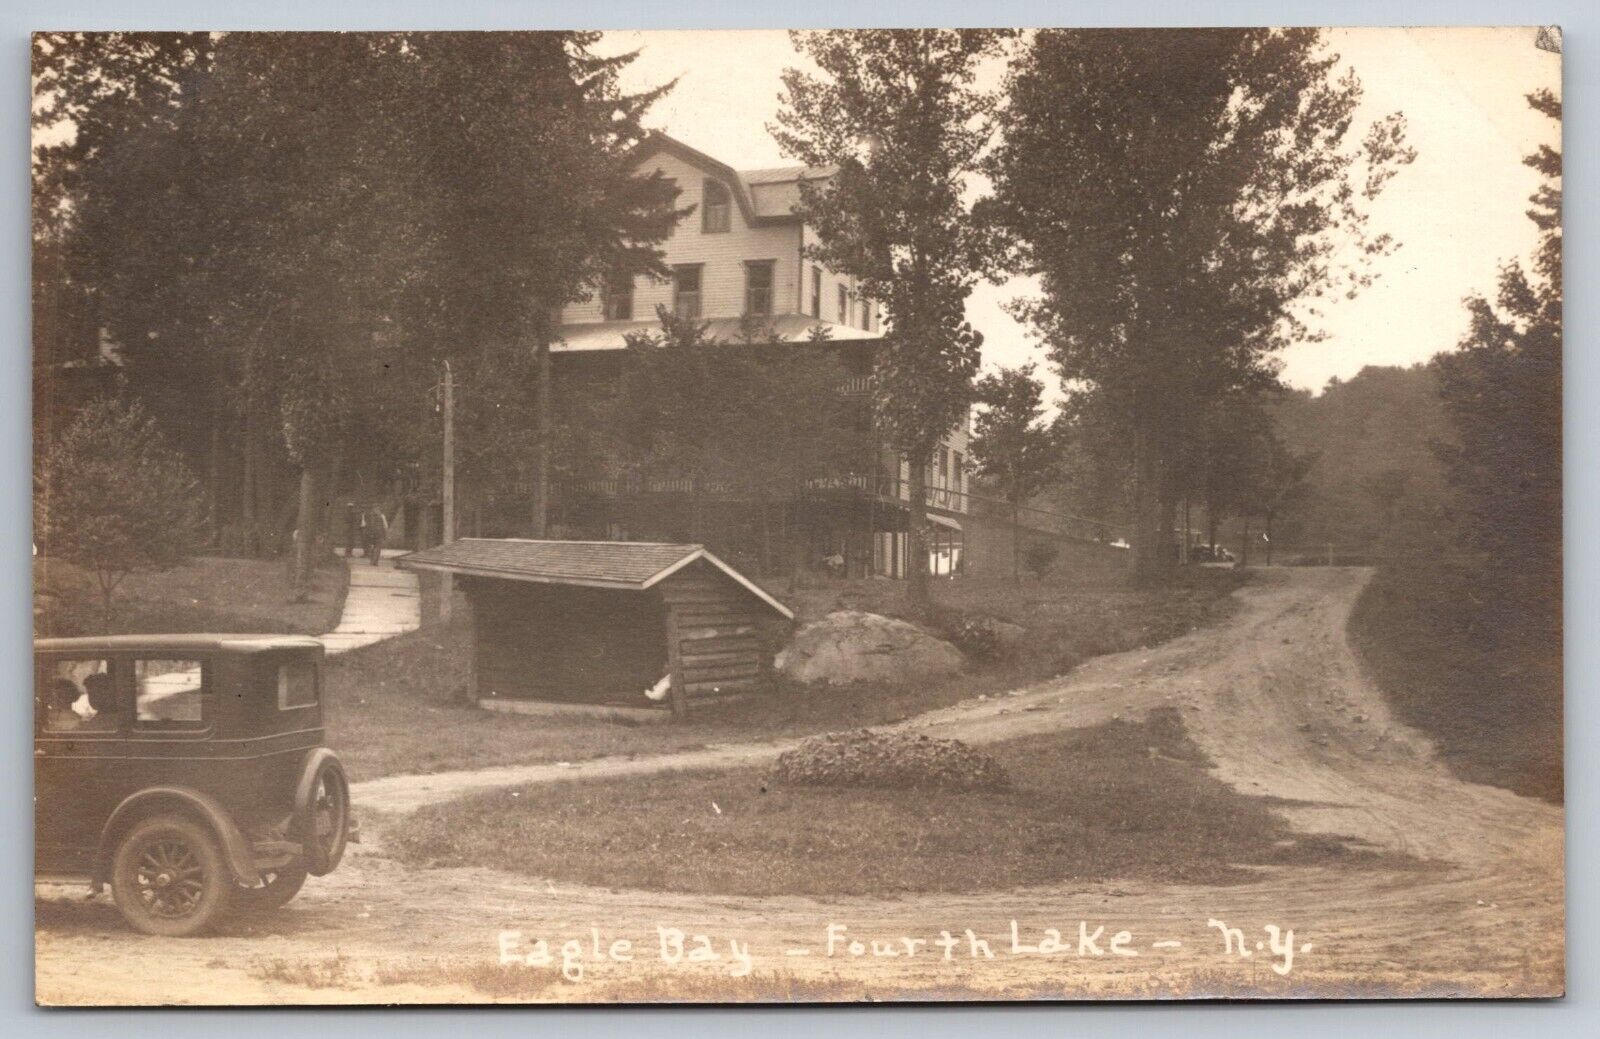 Eagle Bay. Fourth Lake. Vintage Car in Front. New York Real Photo Postcard RPPC